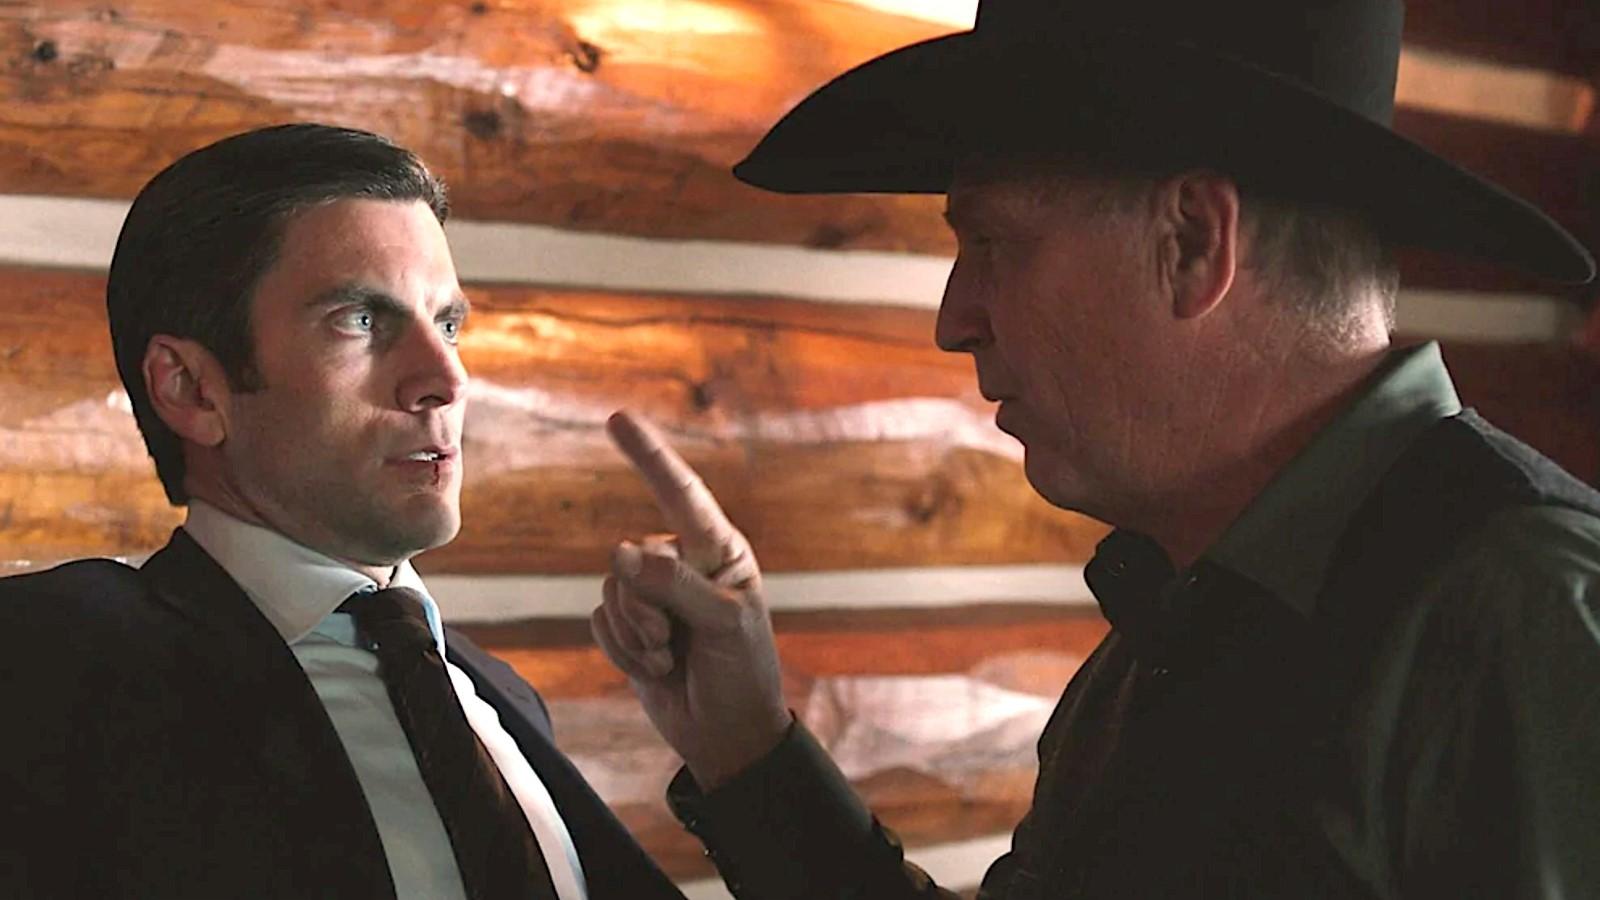 Wes Bentley and Kevin Costner as John Dutton in Yellowstone